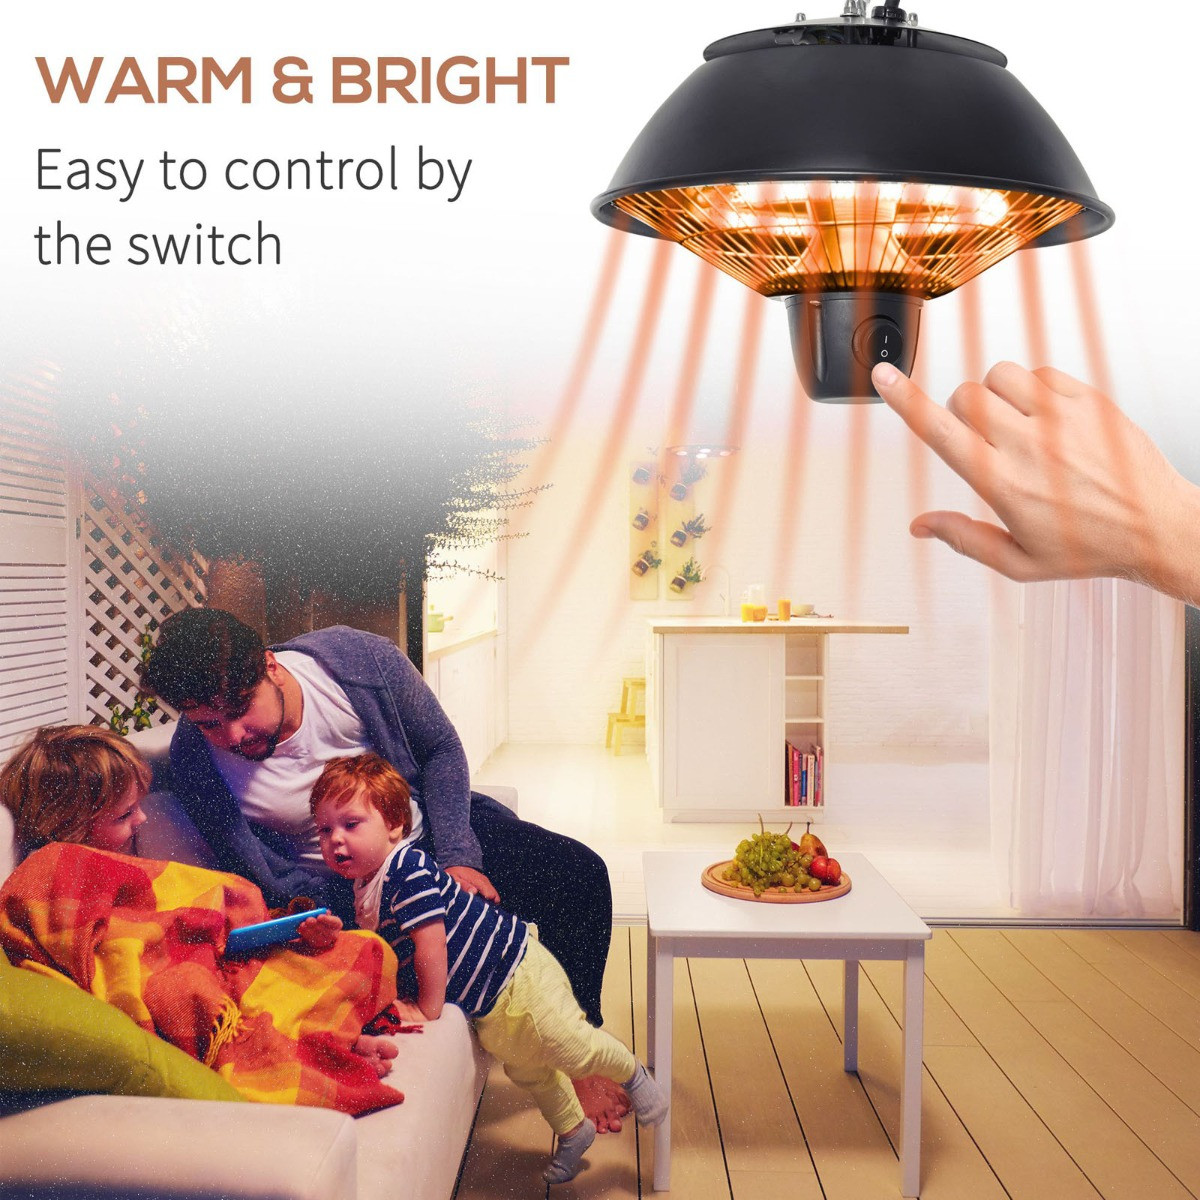 Outsunny Hanging Electric Halogen Heater Light, 600W - Black>